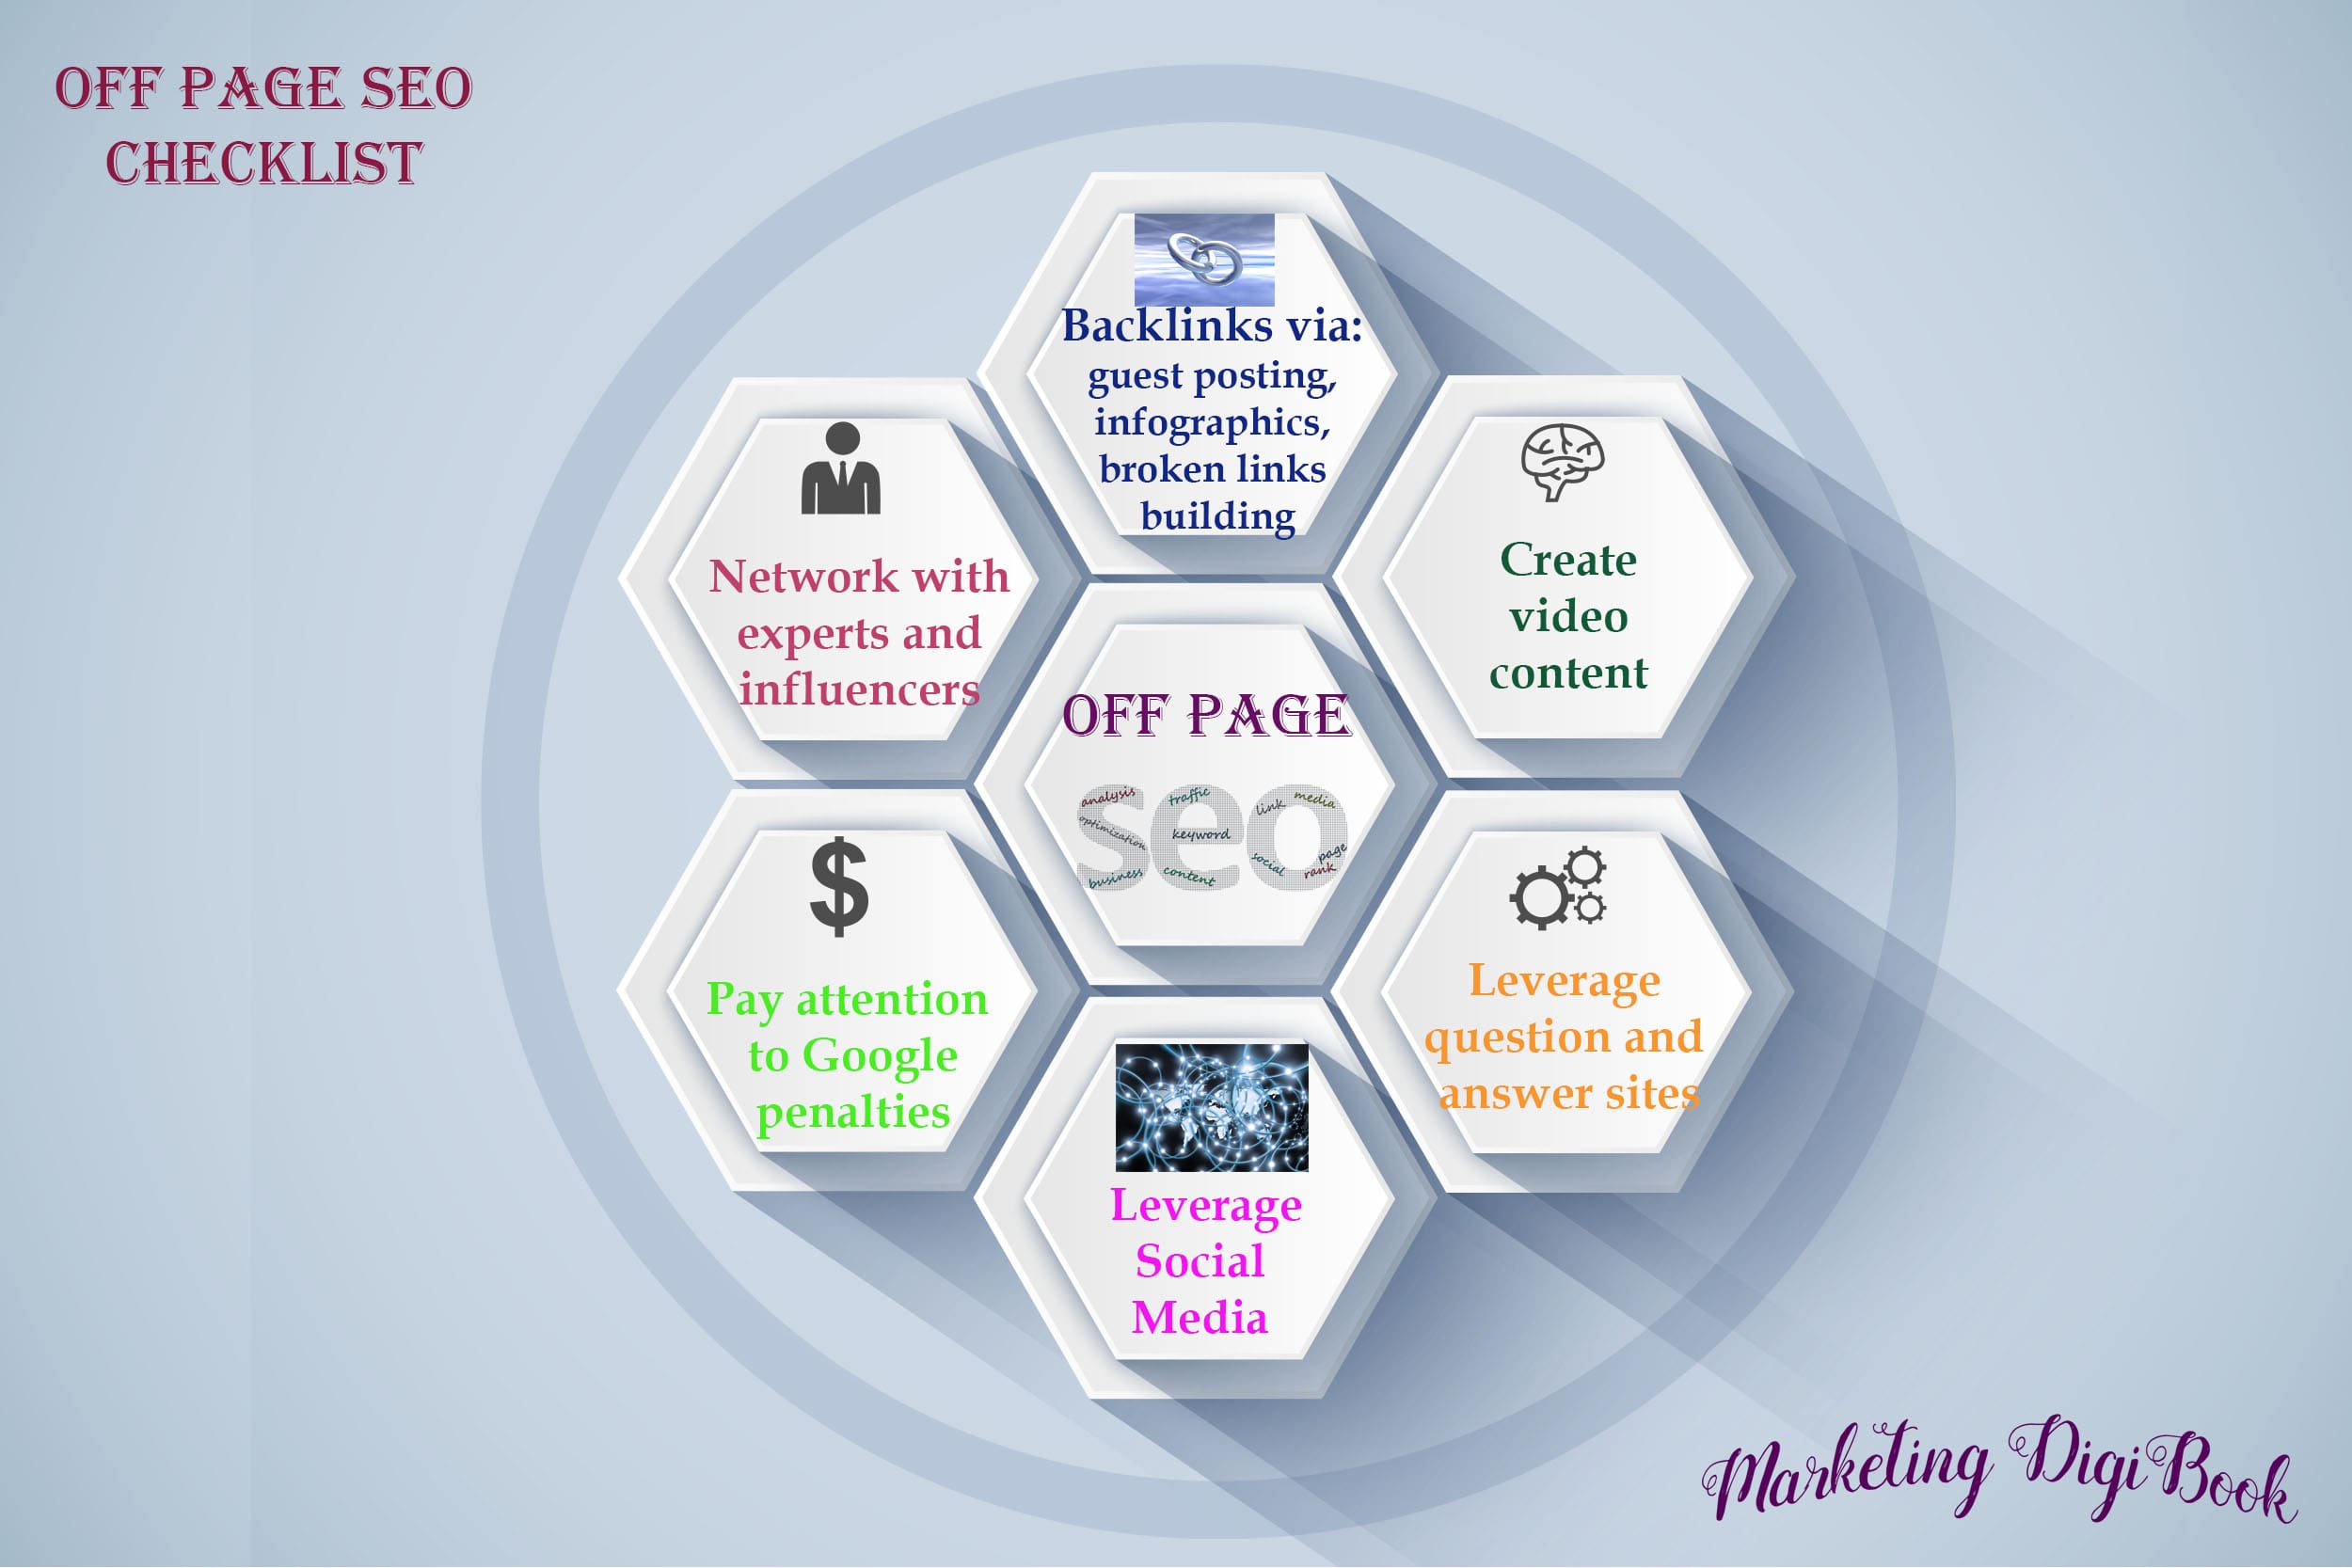 Off page SEO checklist - Off page SEO optimisation